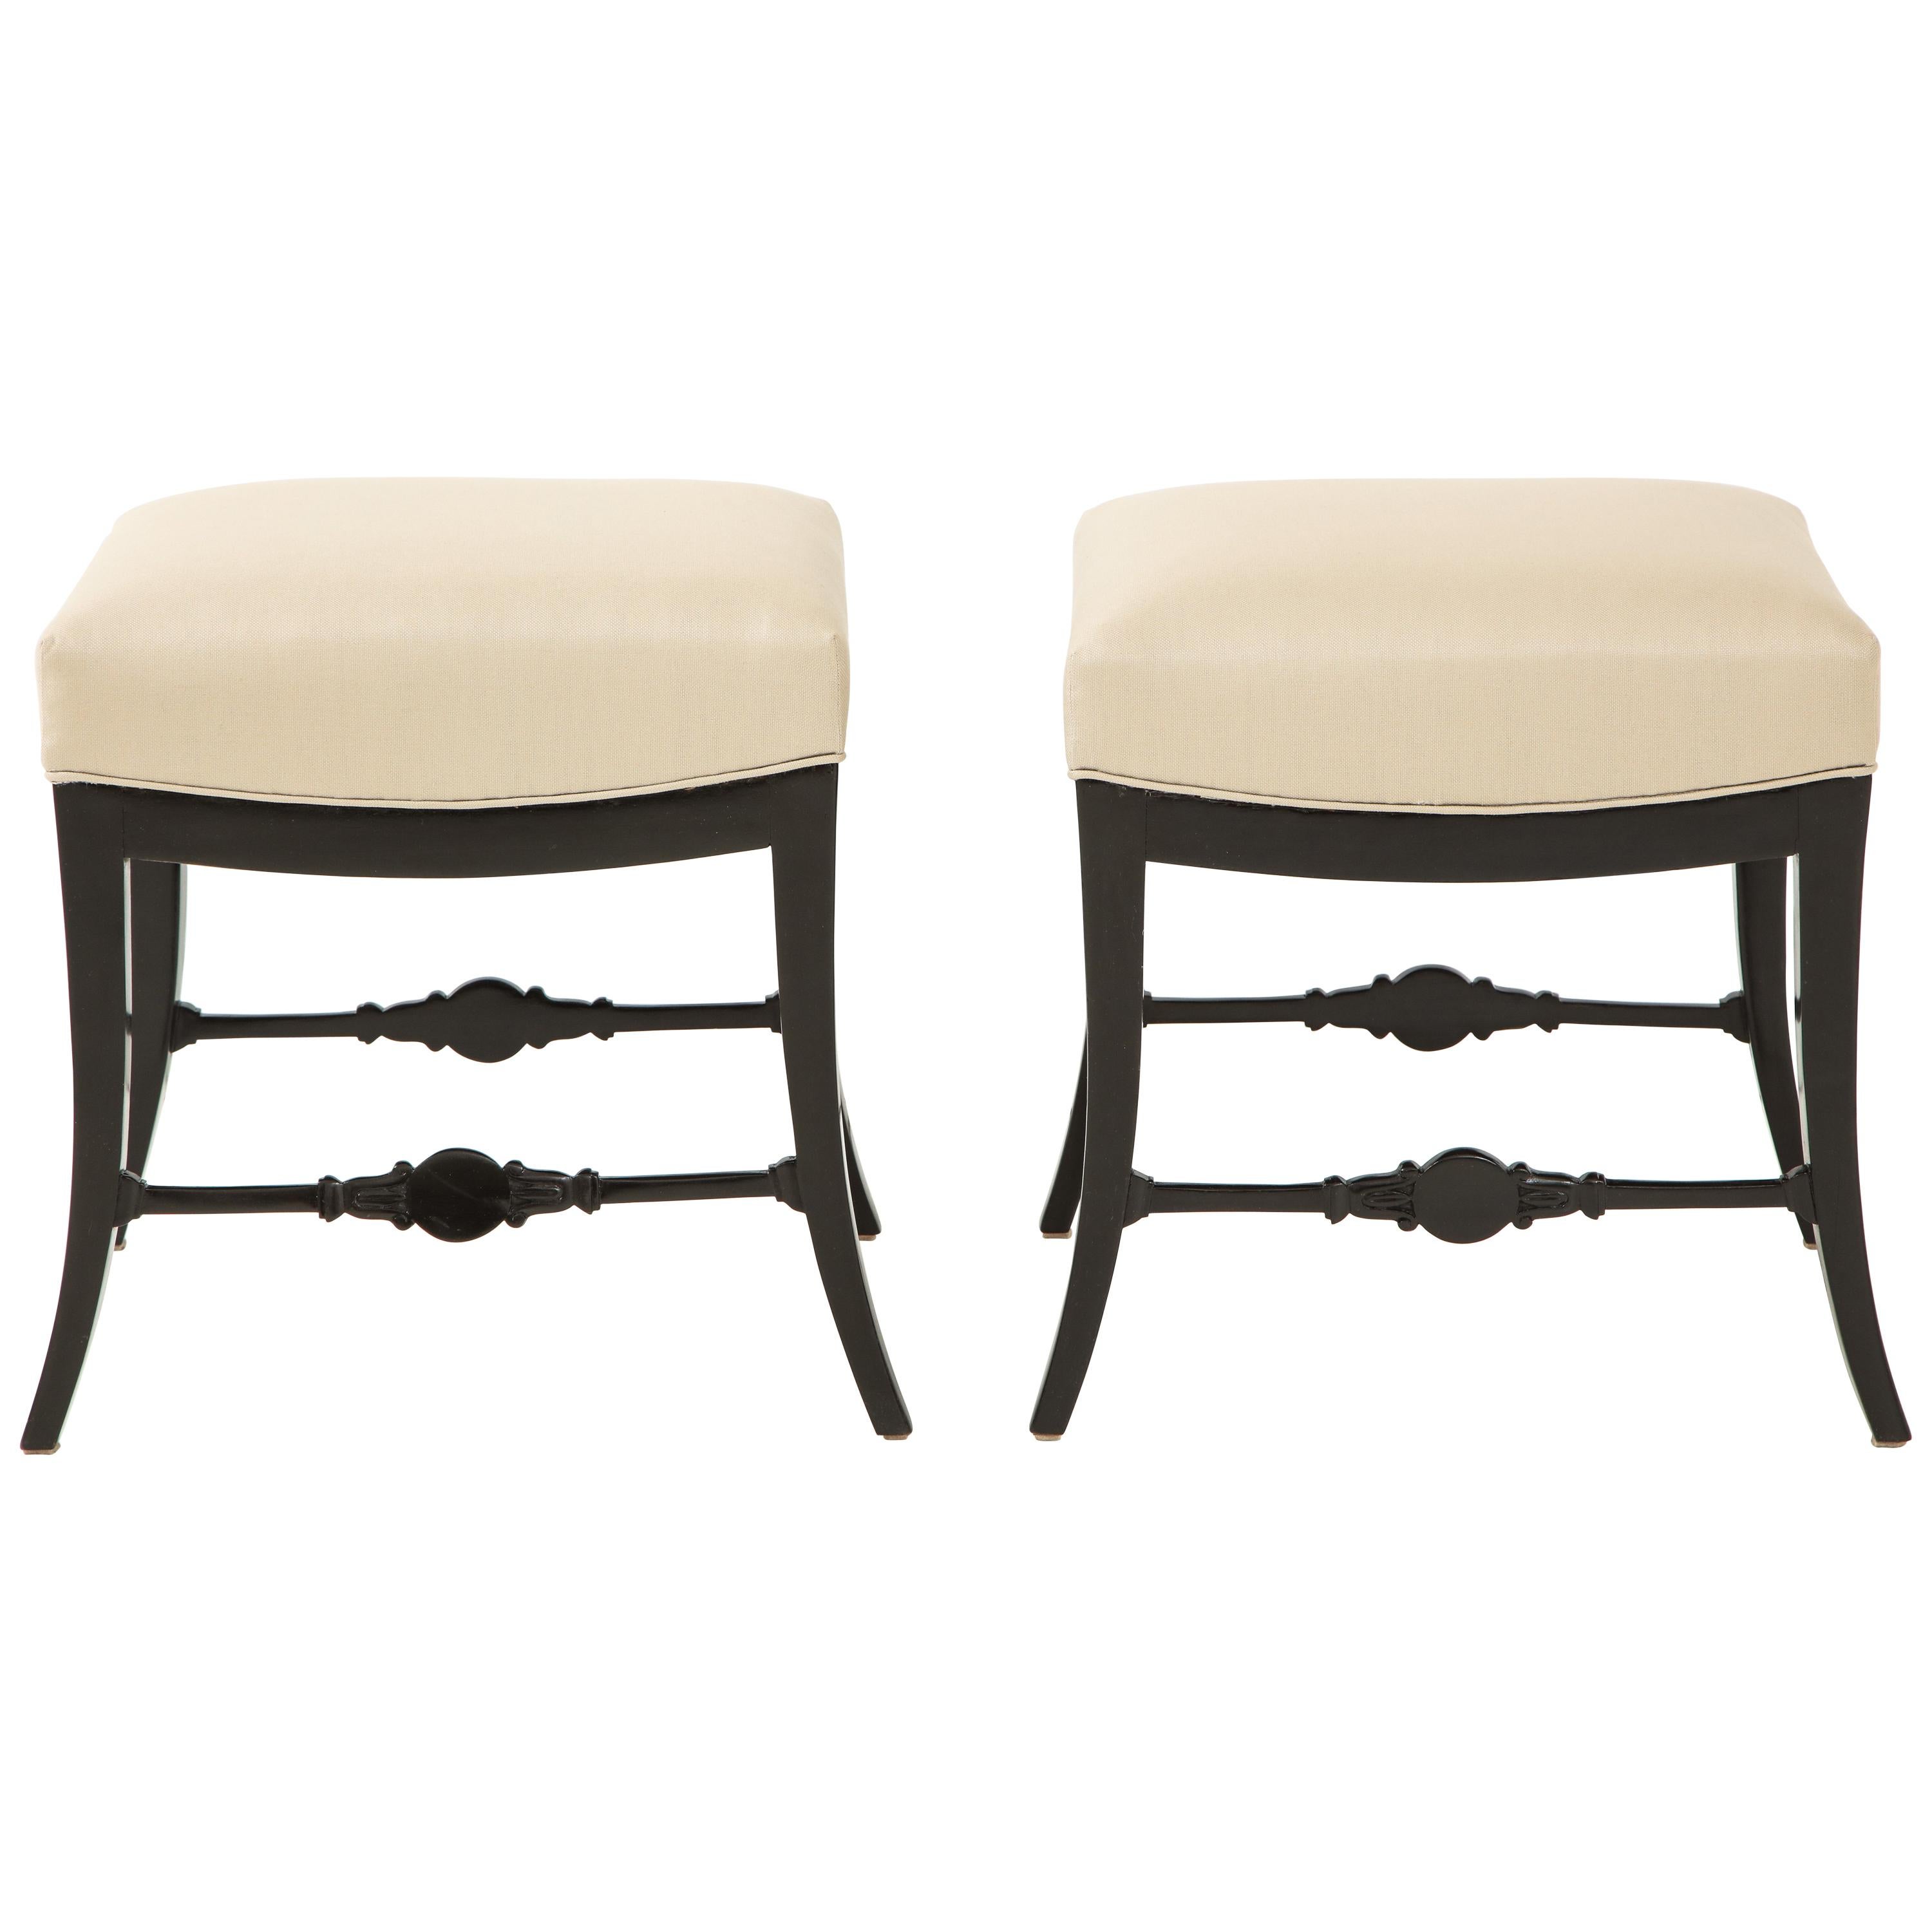 Pair of Swedish Neoclassical Ebonized and Upholstered Stools, circa 1830s